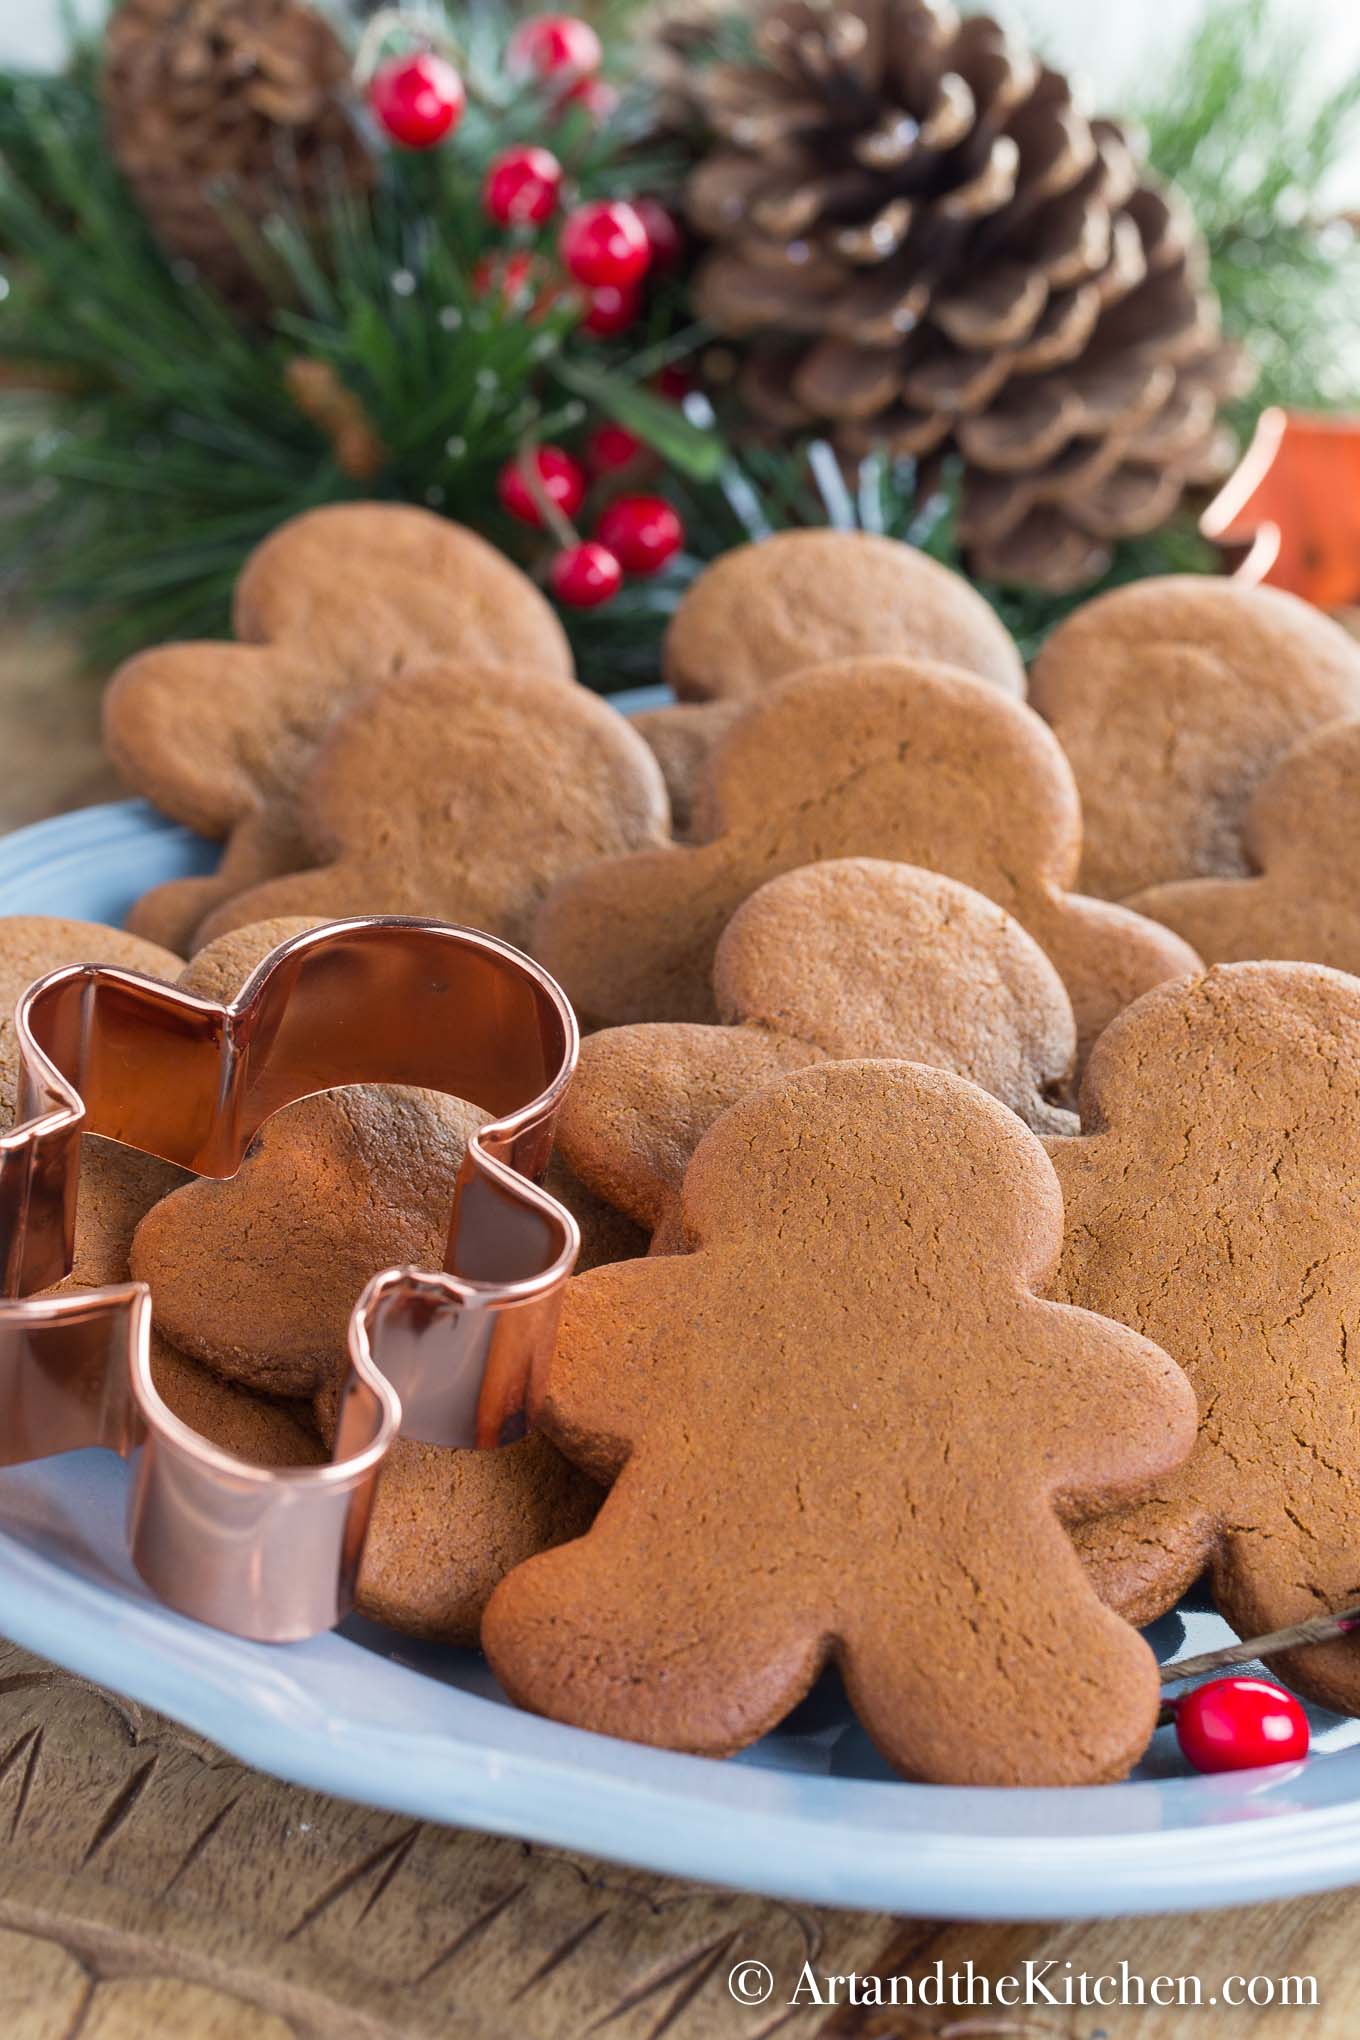 Plate filled with undecorated gingerbread men and copper gingerbread man cookie cutter.